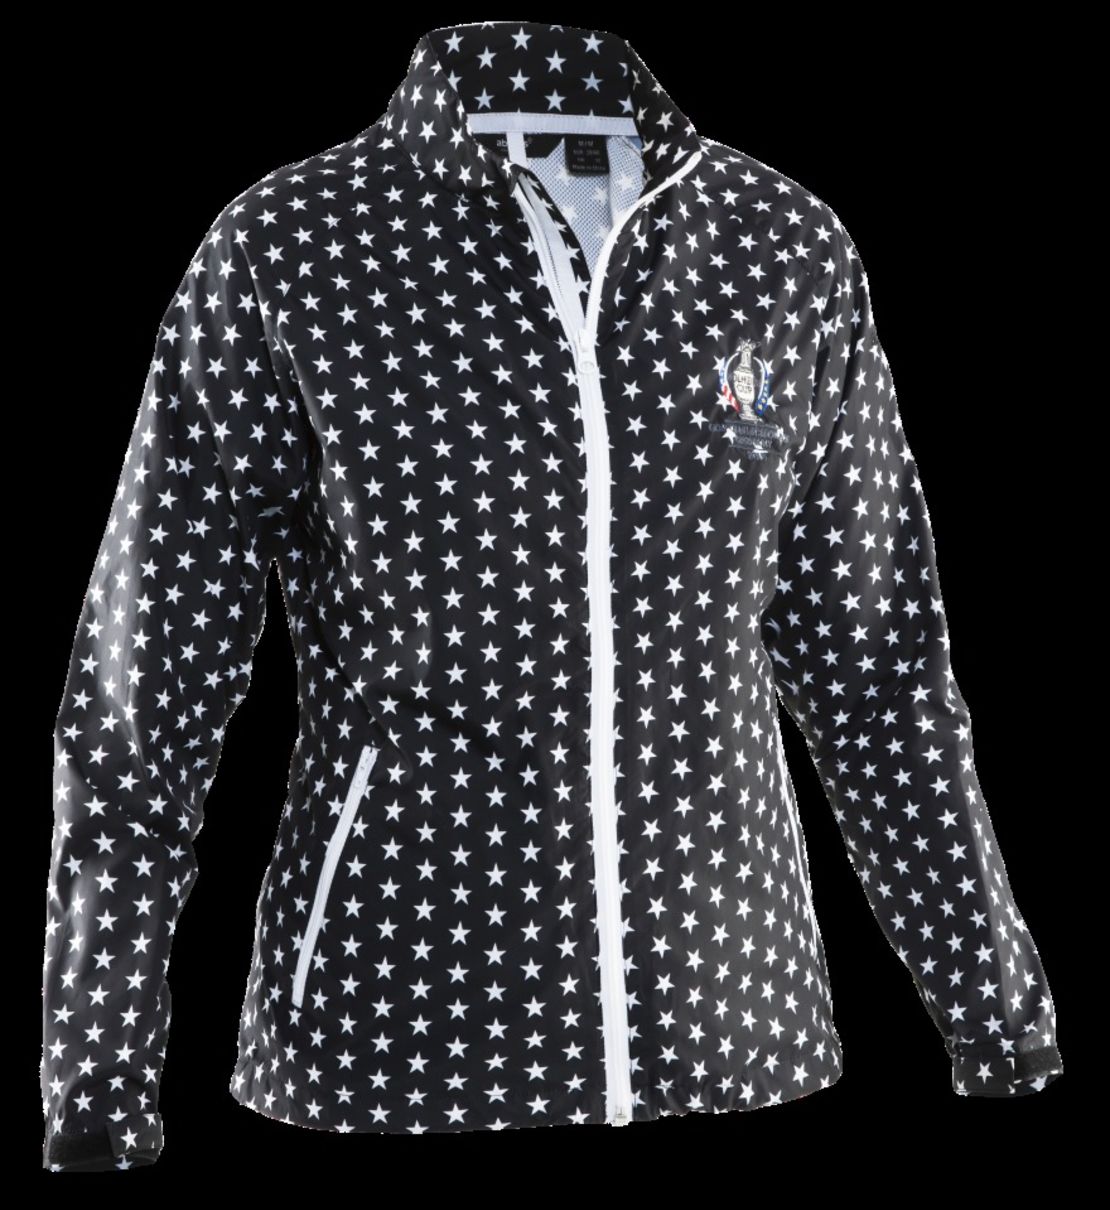 The jacket that will be worn by the European team during the 2015 Solheim Cup.